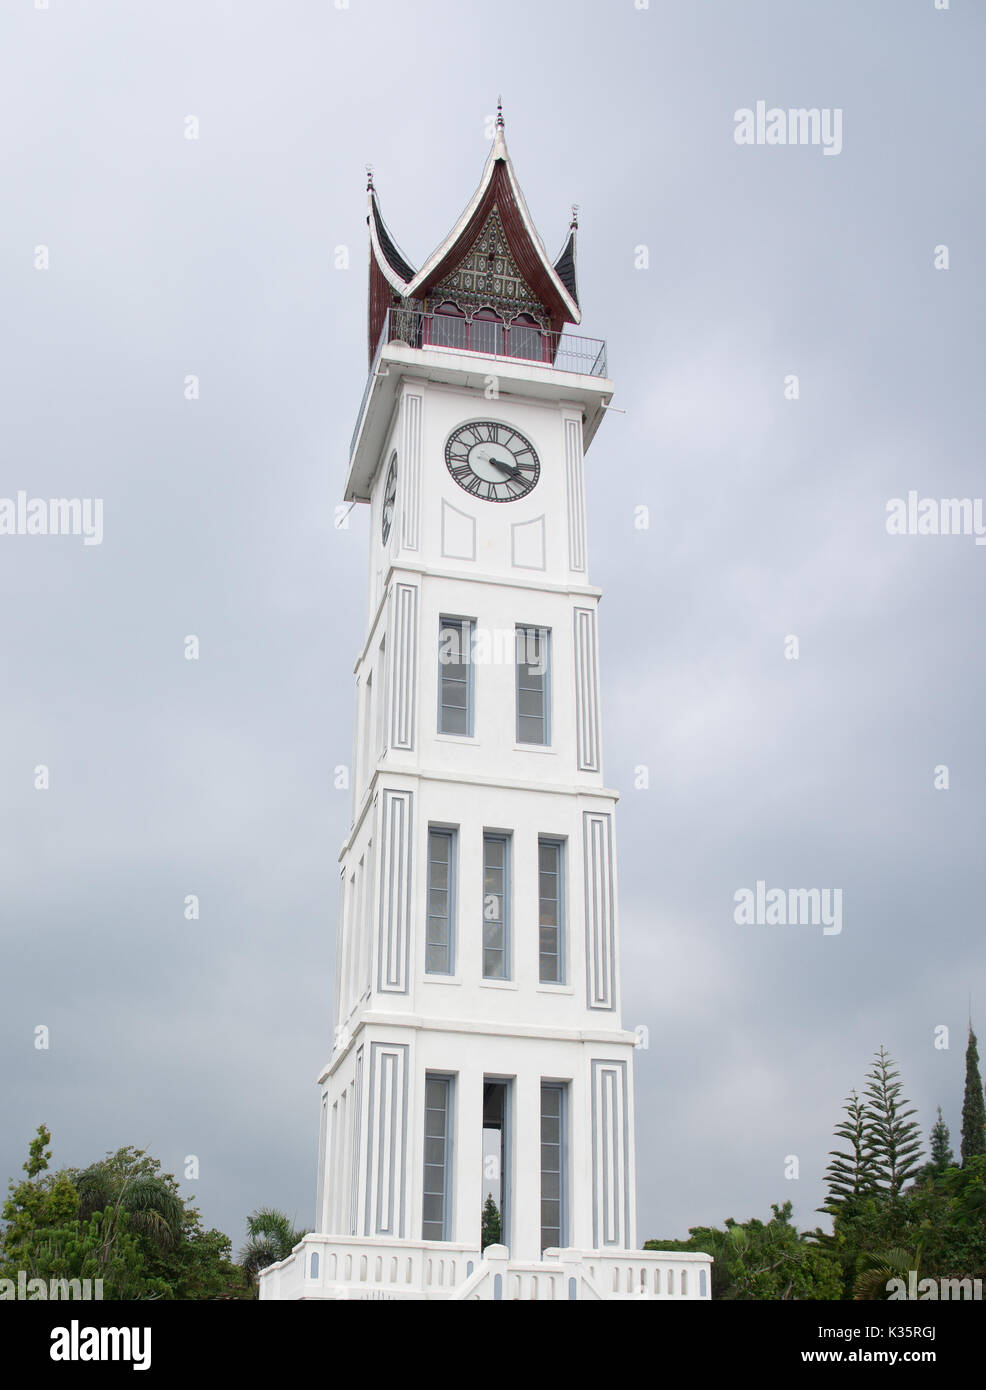 Jam Gadang, Bukittinggi white clock tower in central Bukittinggi, a city in the Minangkabau Highlands of West Sumatra. It sits in the middle of the Sa Stock Photo